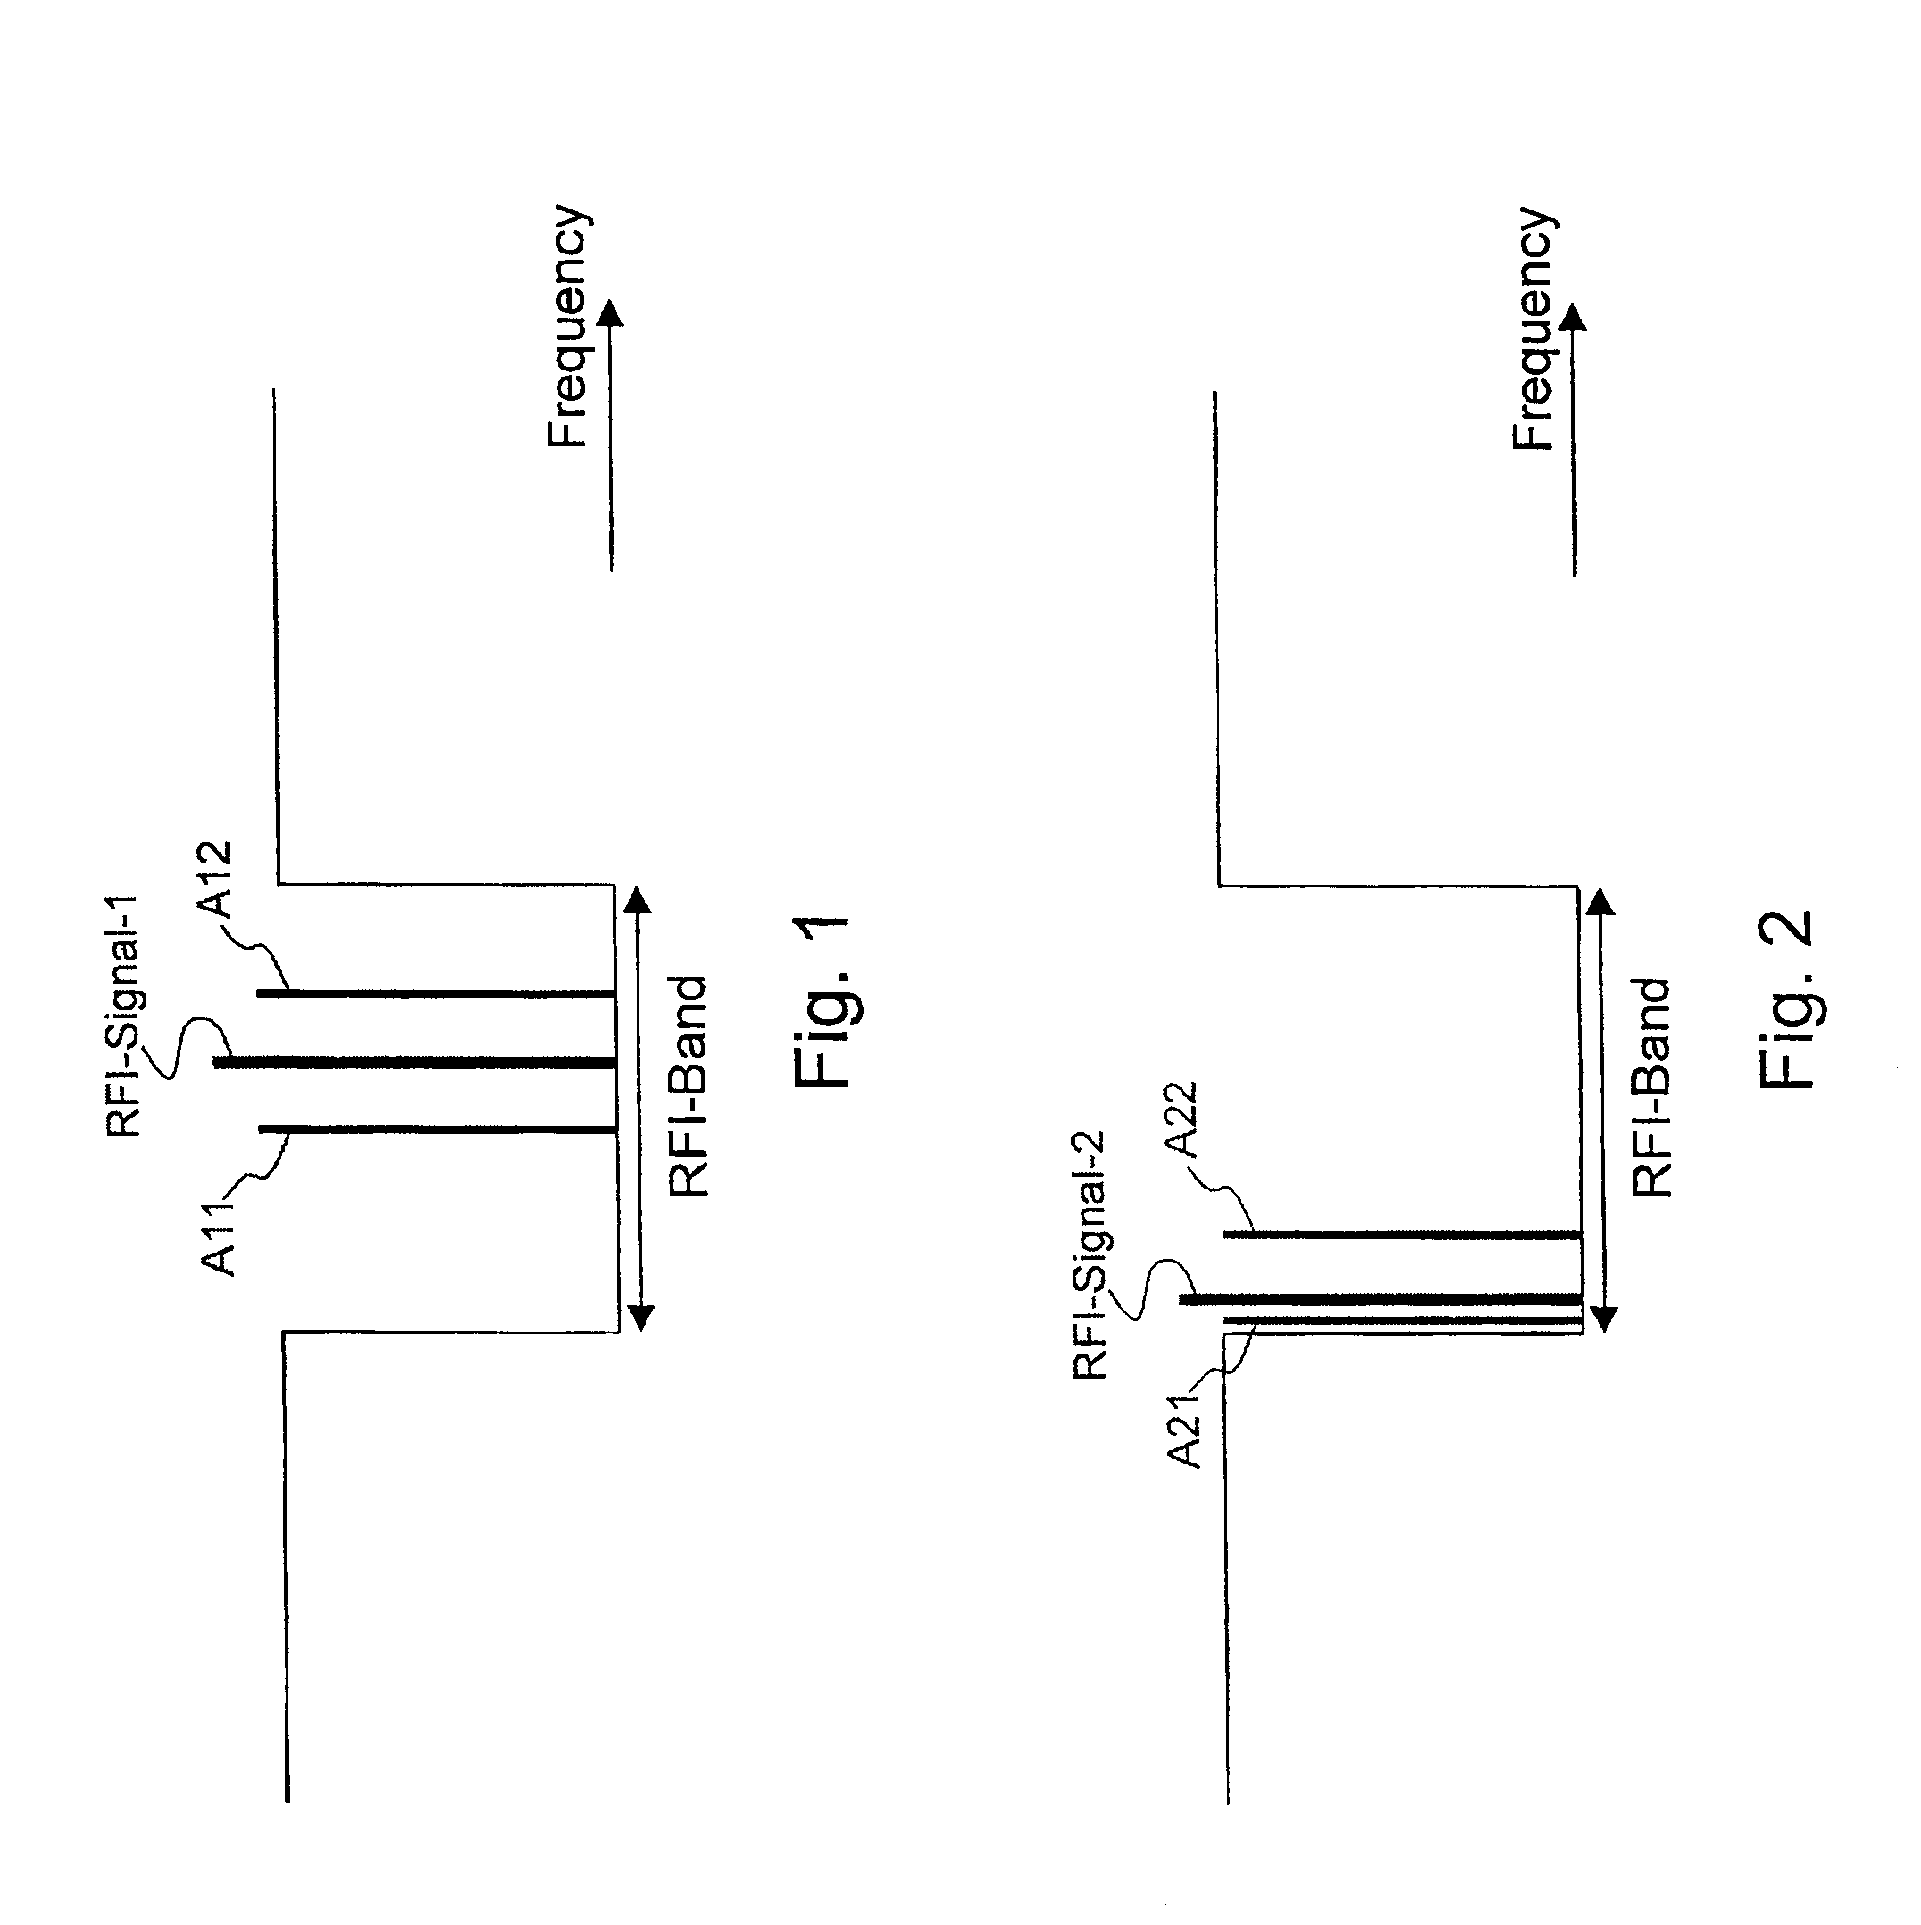 Multi-carrier receiver with improved radio frequency interference canceling